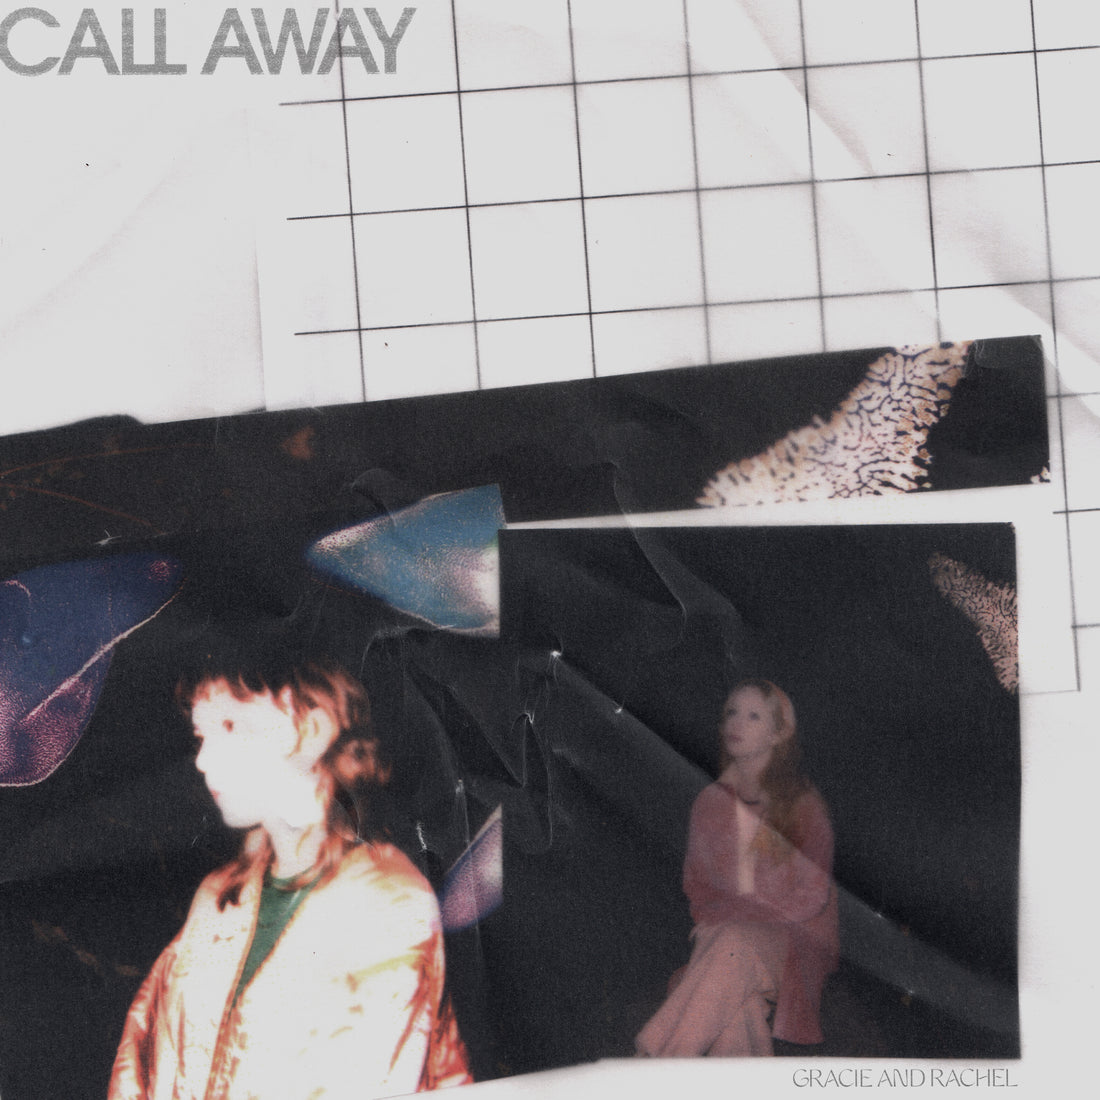 Out Now: Gracie and Rachel's New Single Call Away